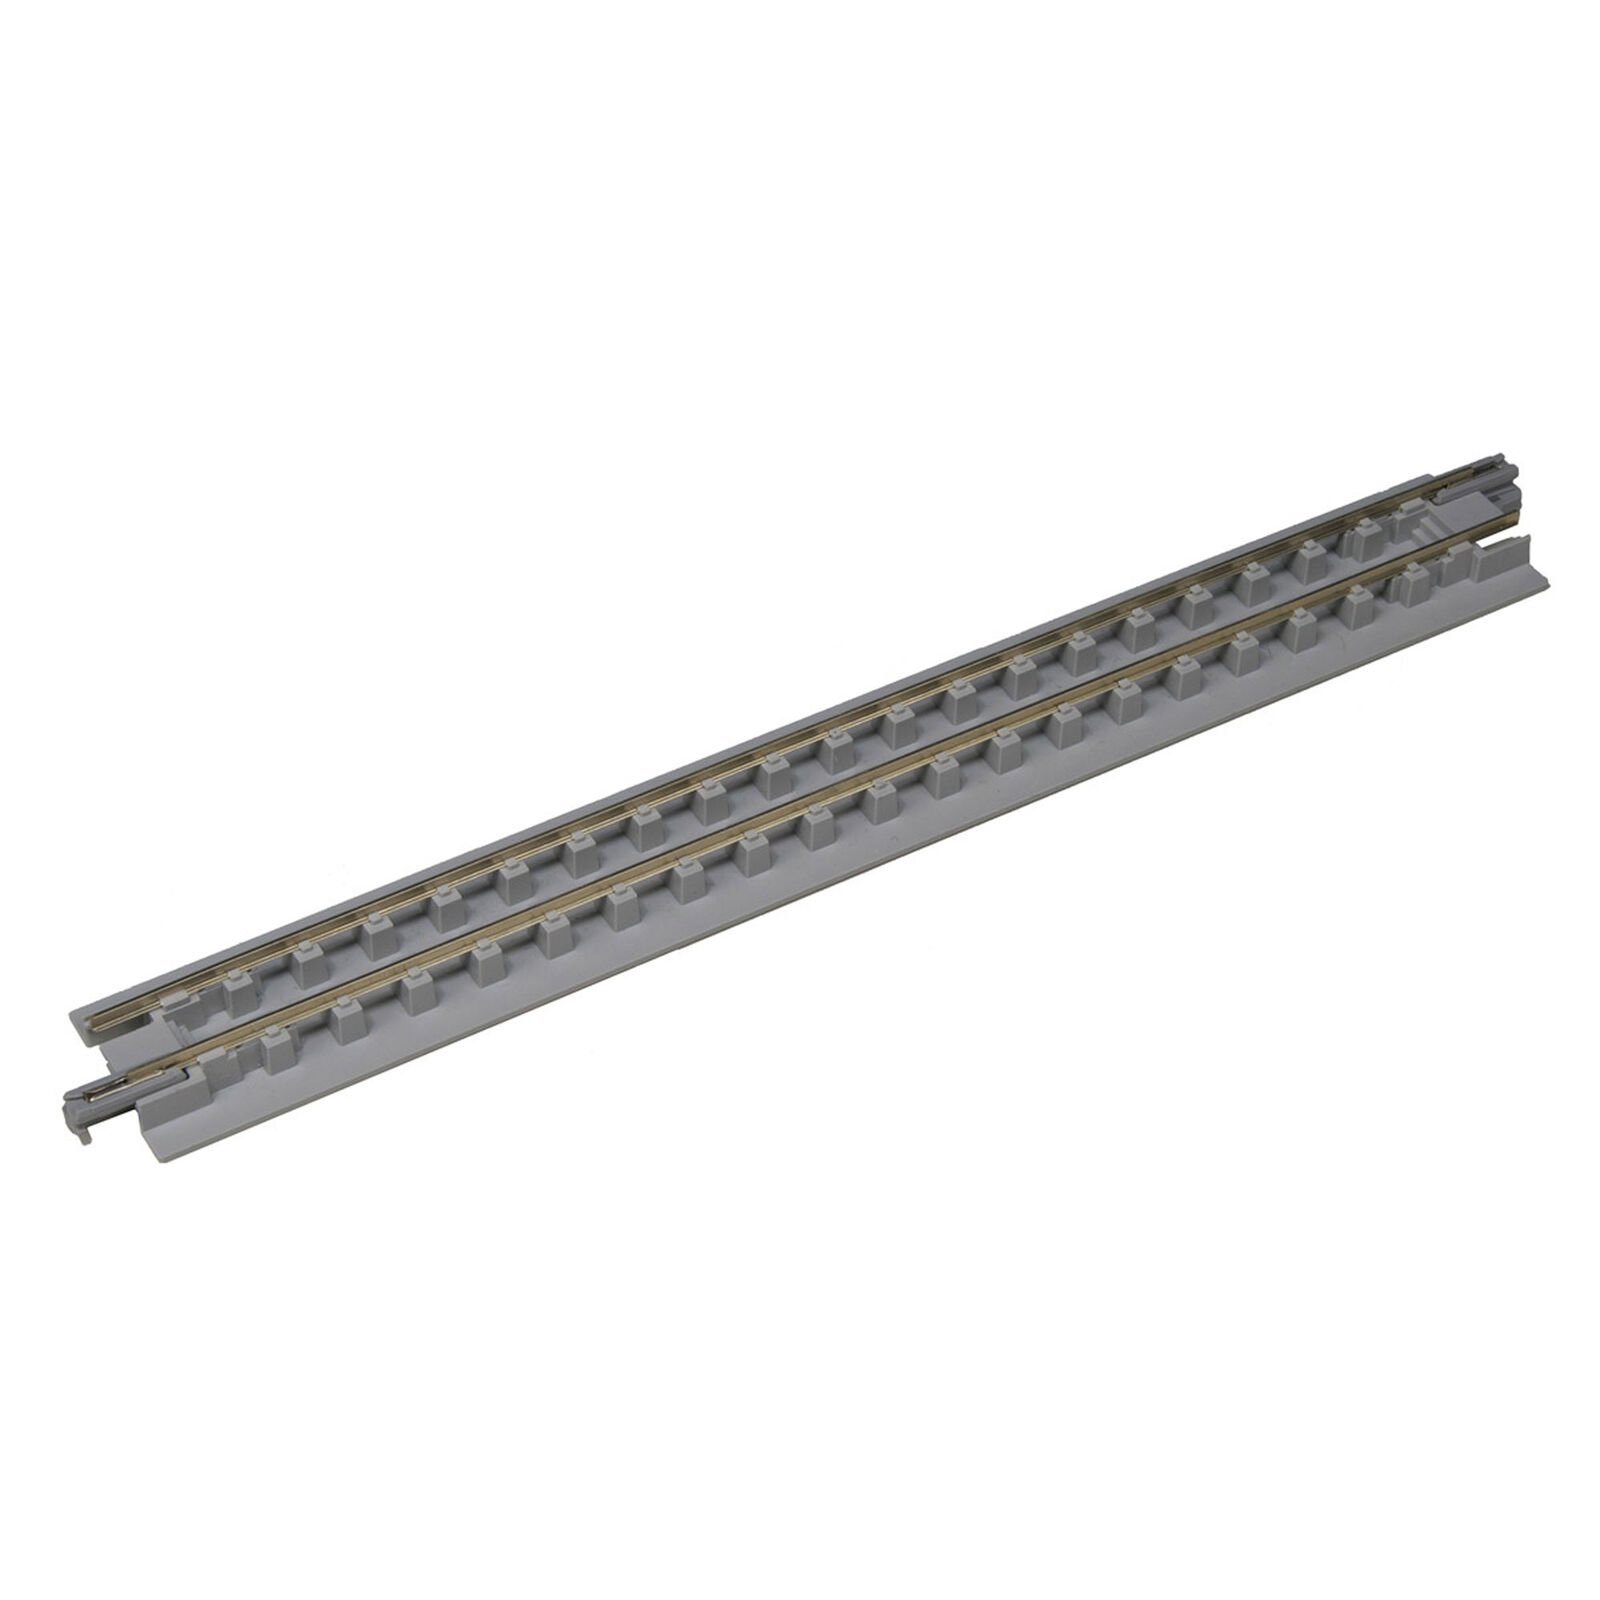 N 186mm 7-5 19" Open Pit Track (4)